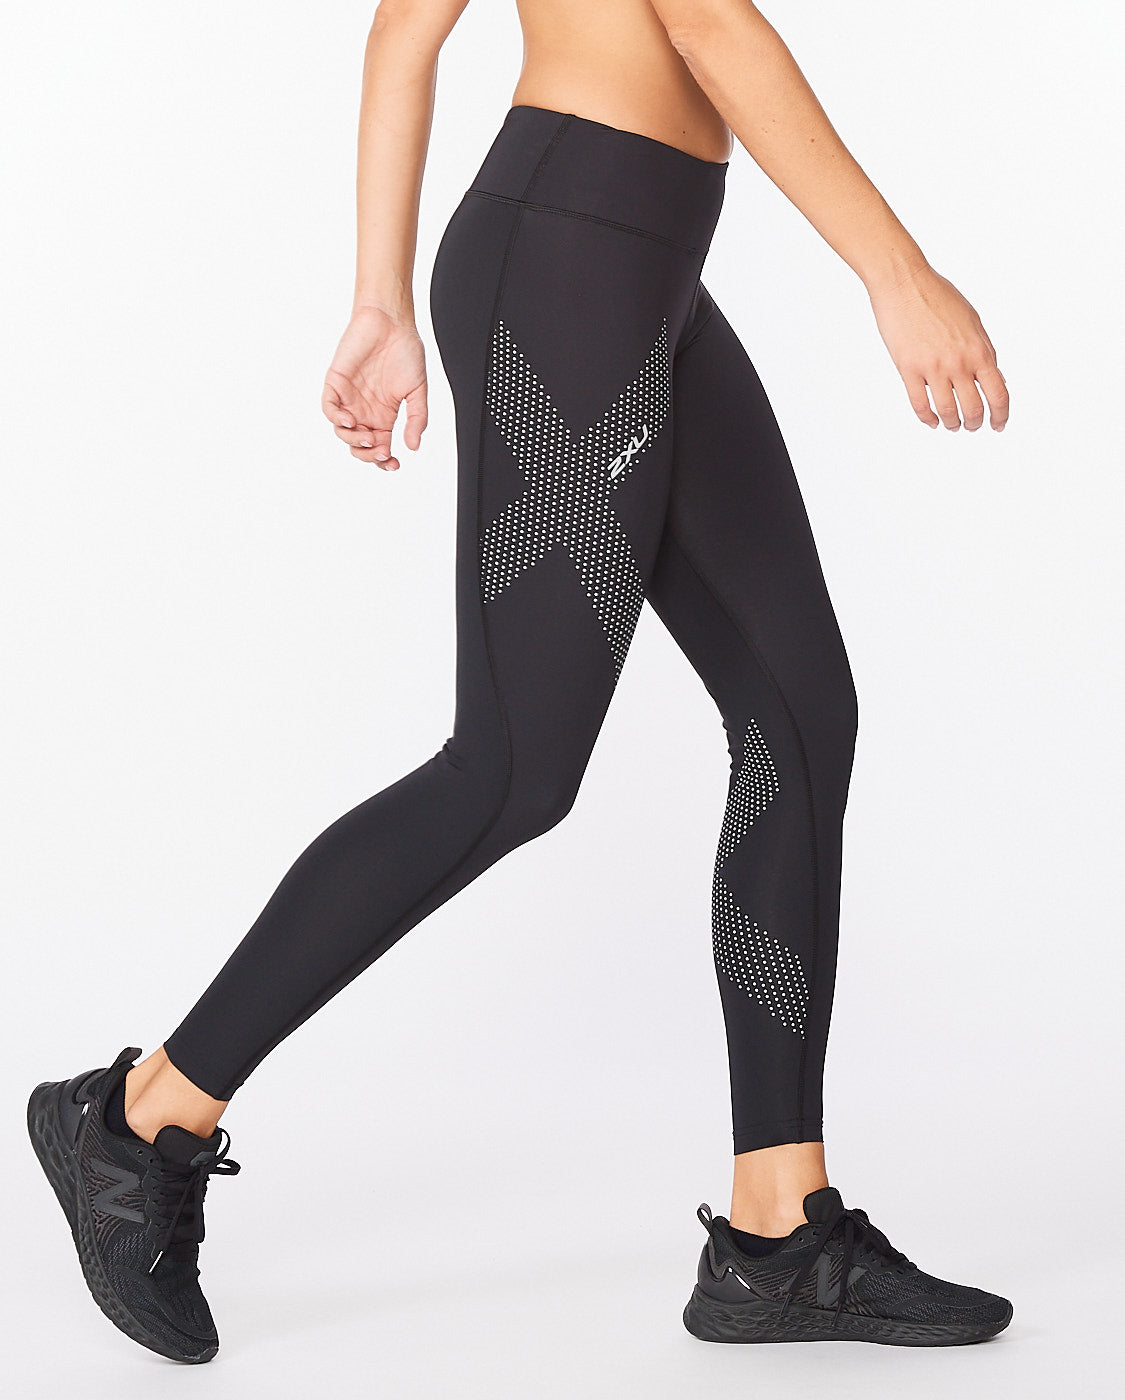 Motion Mid-Rise Compression Tights – 2XU